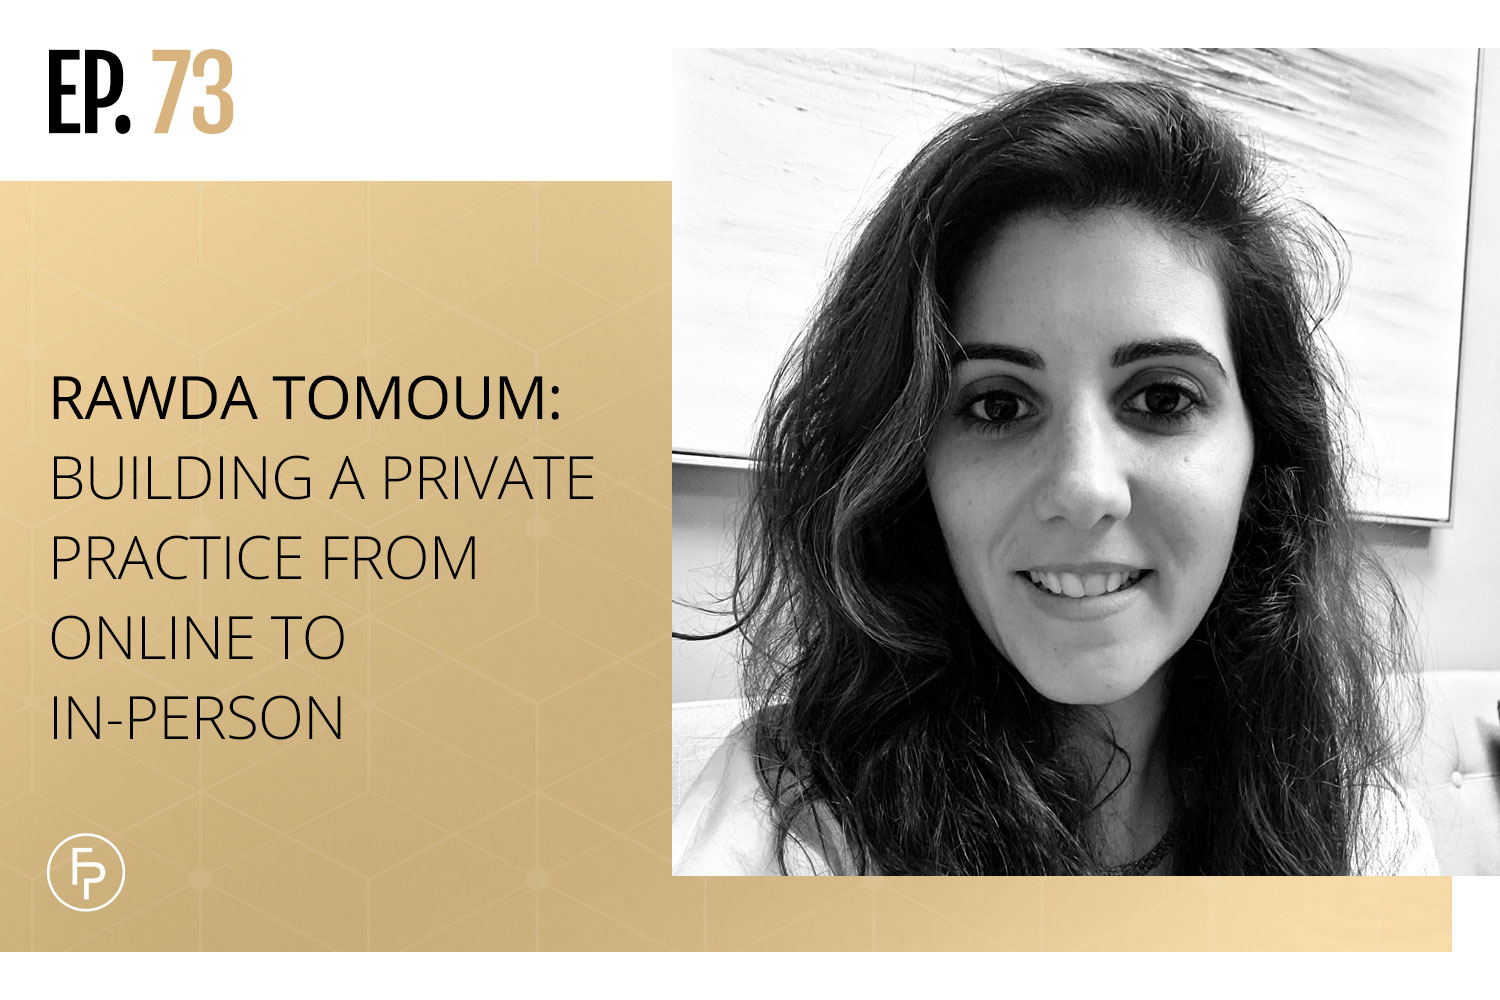 Rawda Tomoum: Building a Private Practice From Online to In-Person | Ep 73